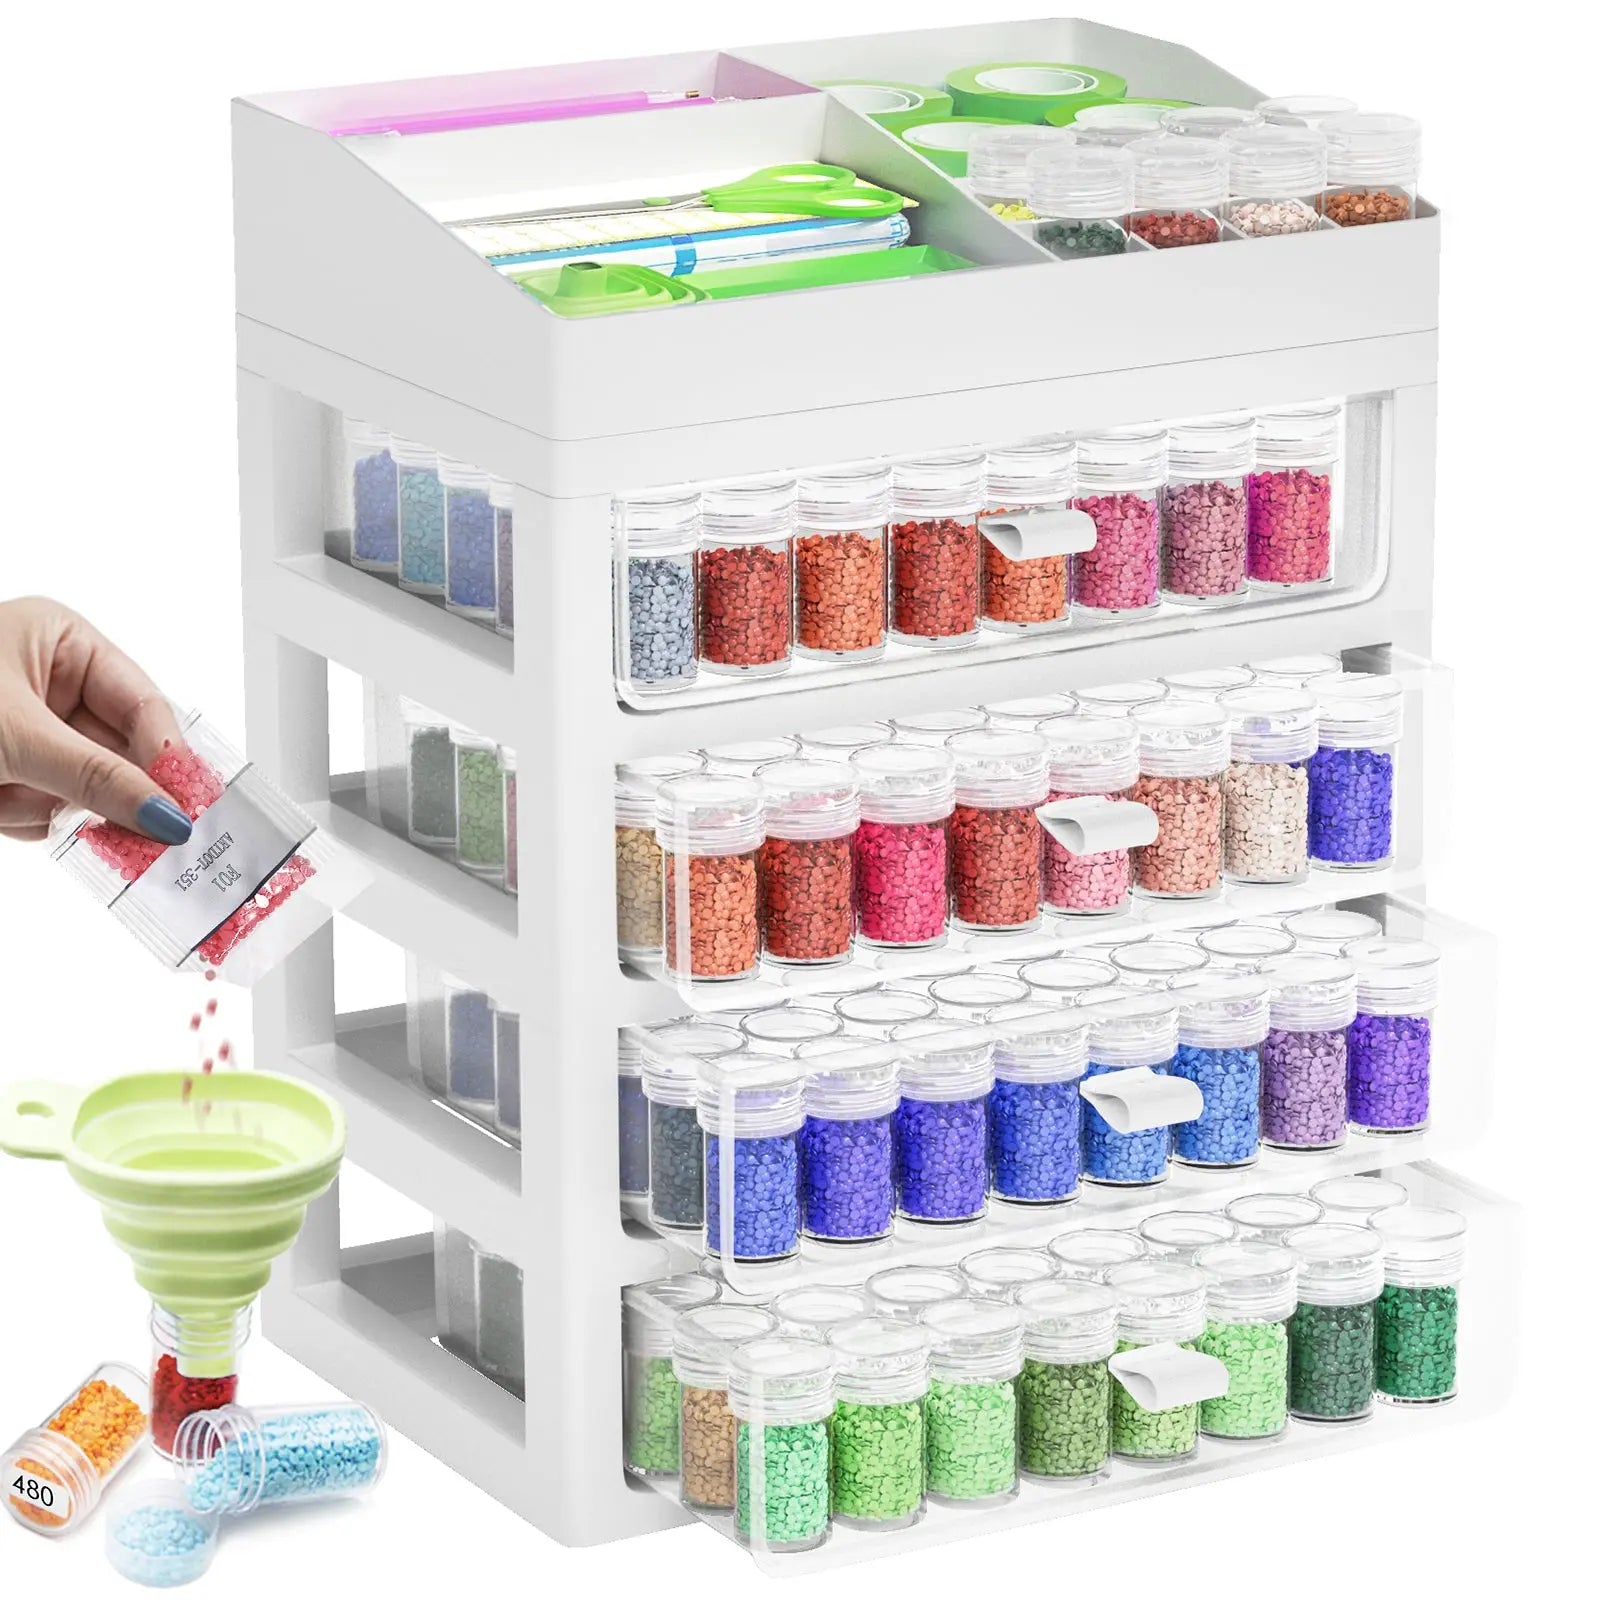  ARTDOT Diamond Painting Storage Boxes, 60 Slots Bead Storage  with 5D Diamond Art Accessories and Tools Kit : Arts, Crafts & Sewing